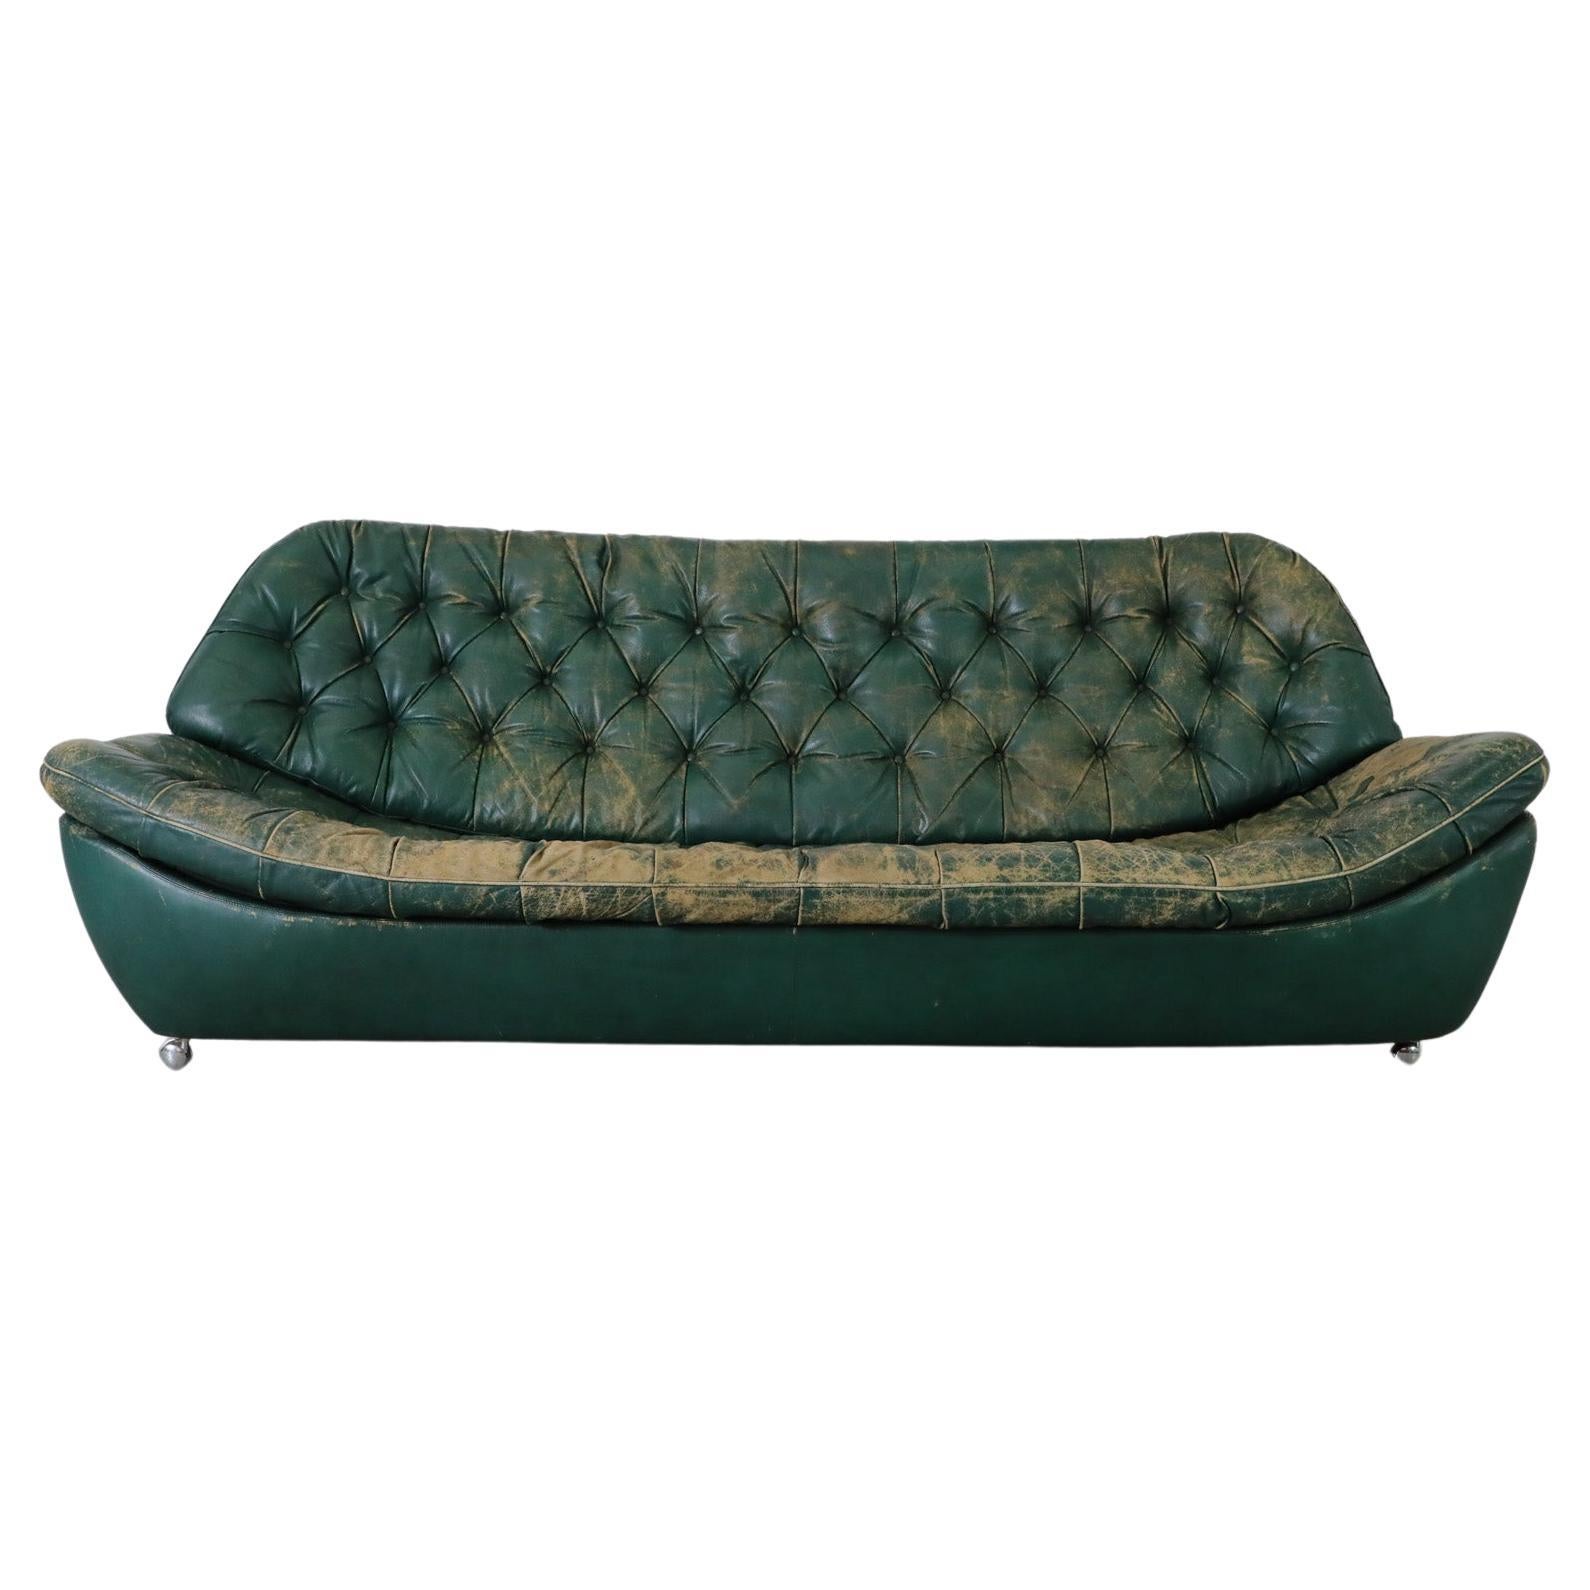 Mid-Century Chesterfield Style Green Leather Tufted Sofa